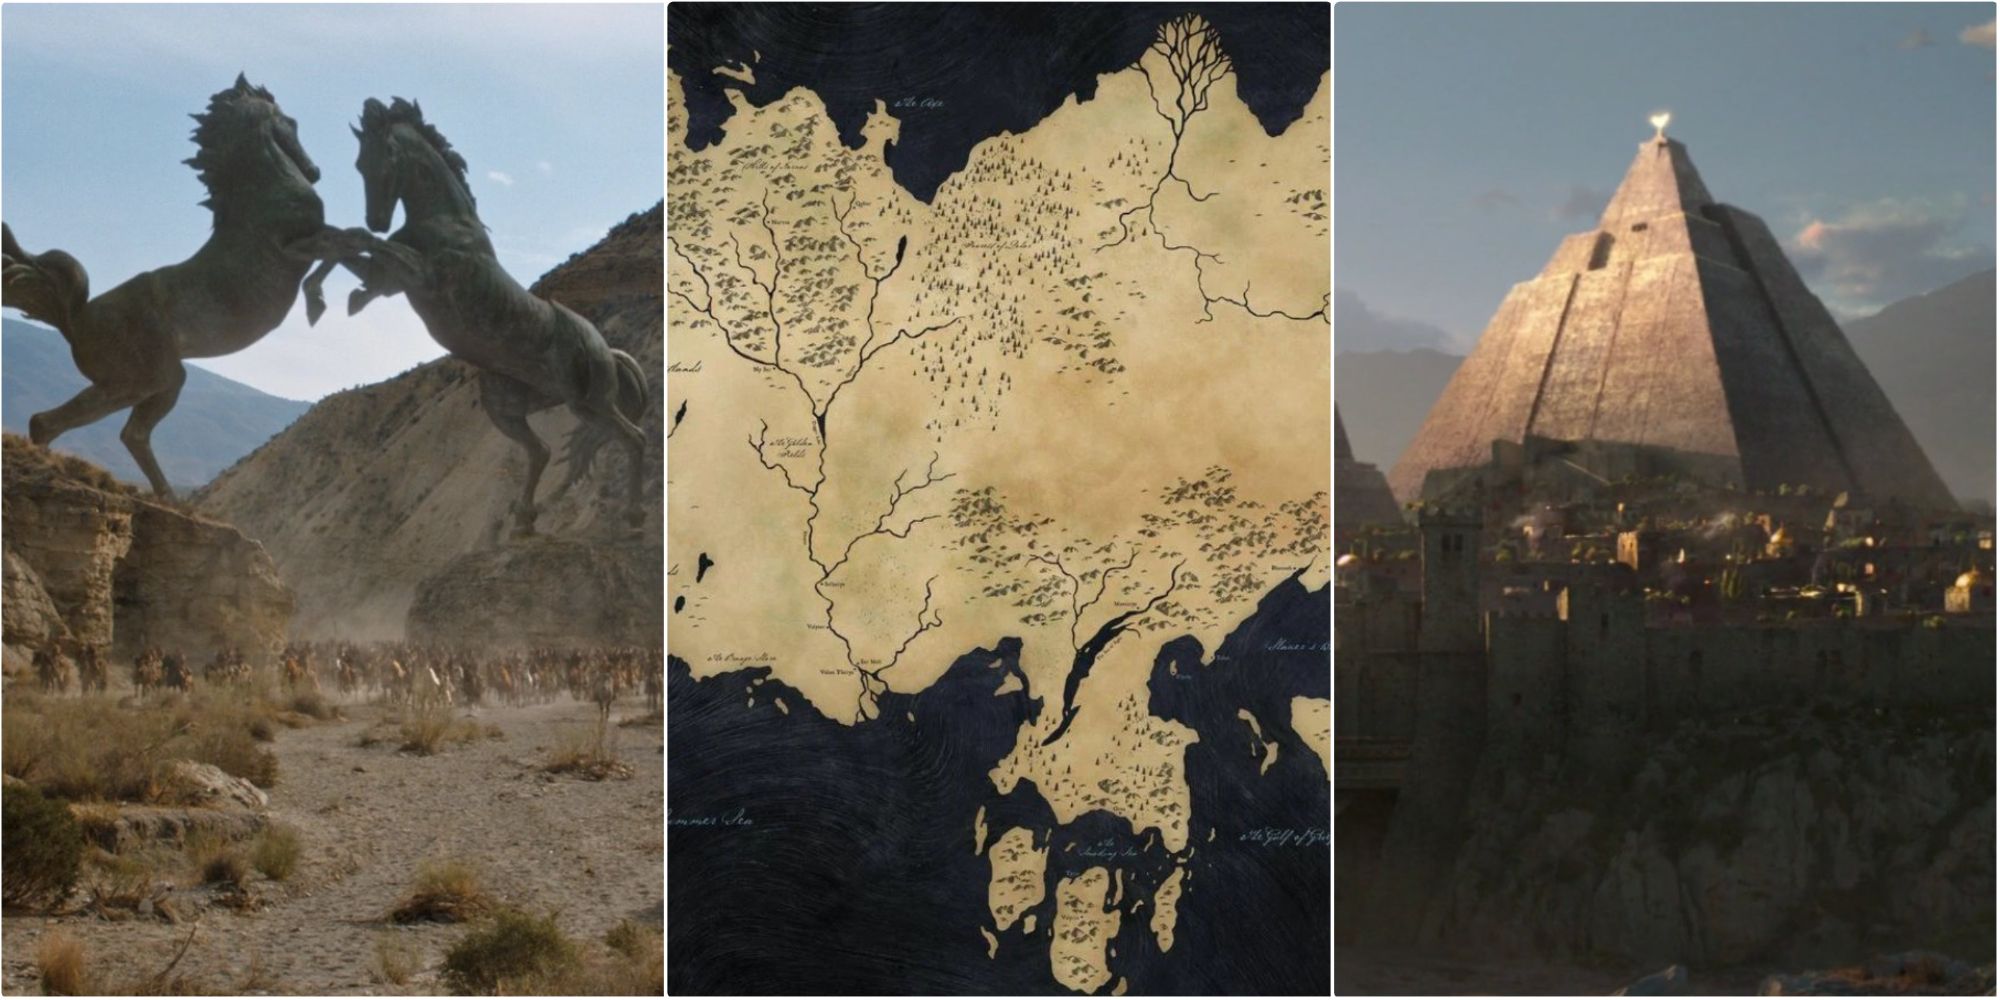 Game Of Thrones: 10 Things You Didn't Know About Essos